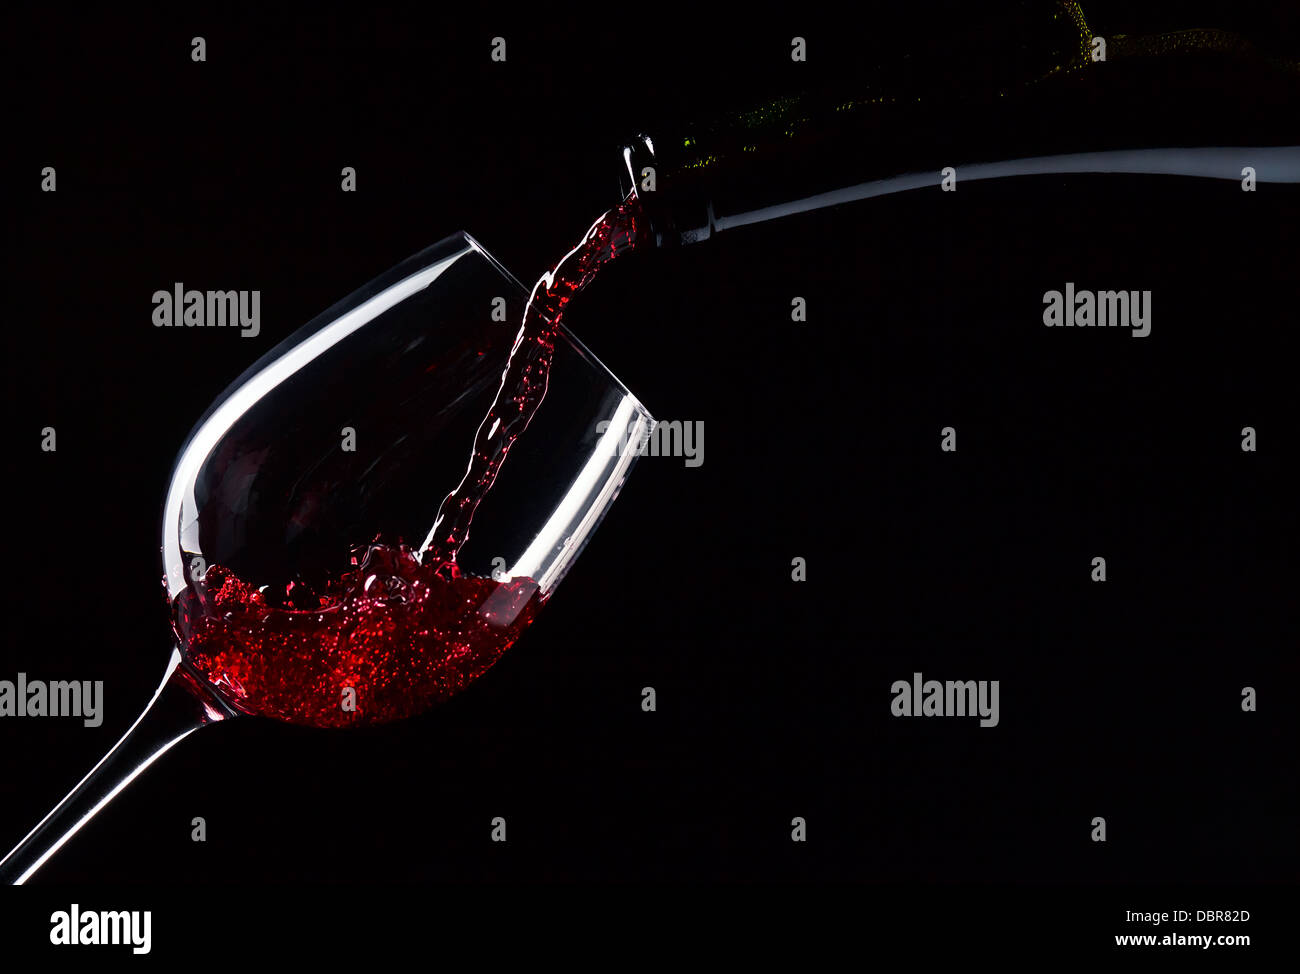 bottle and glass with red wine on a black background Stock Photo